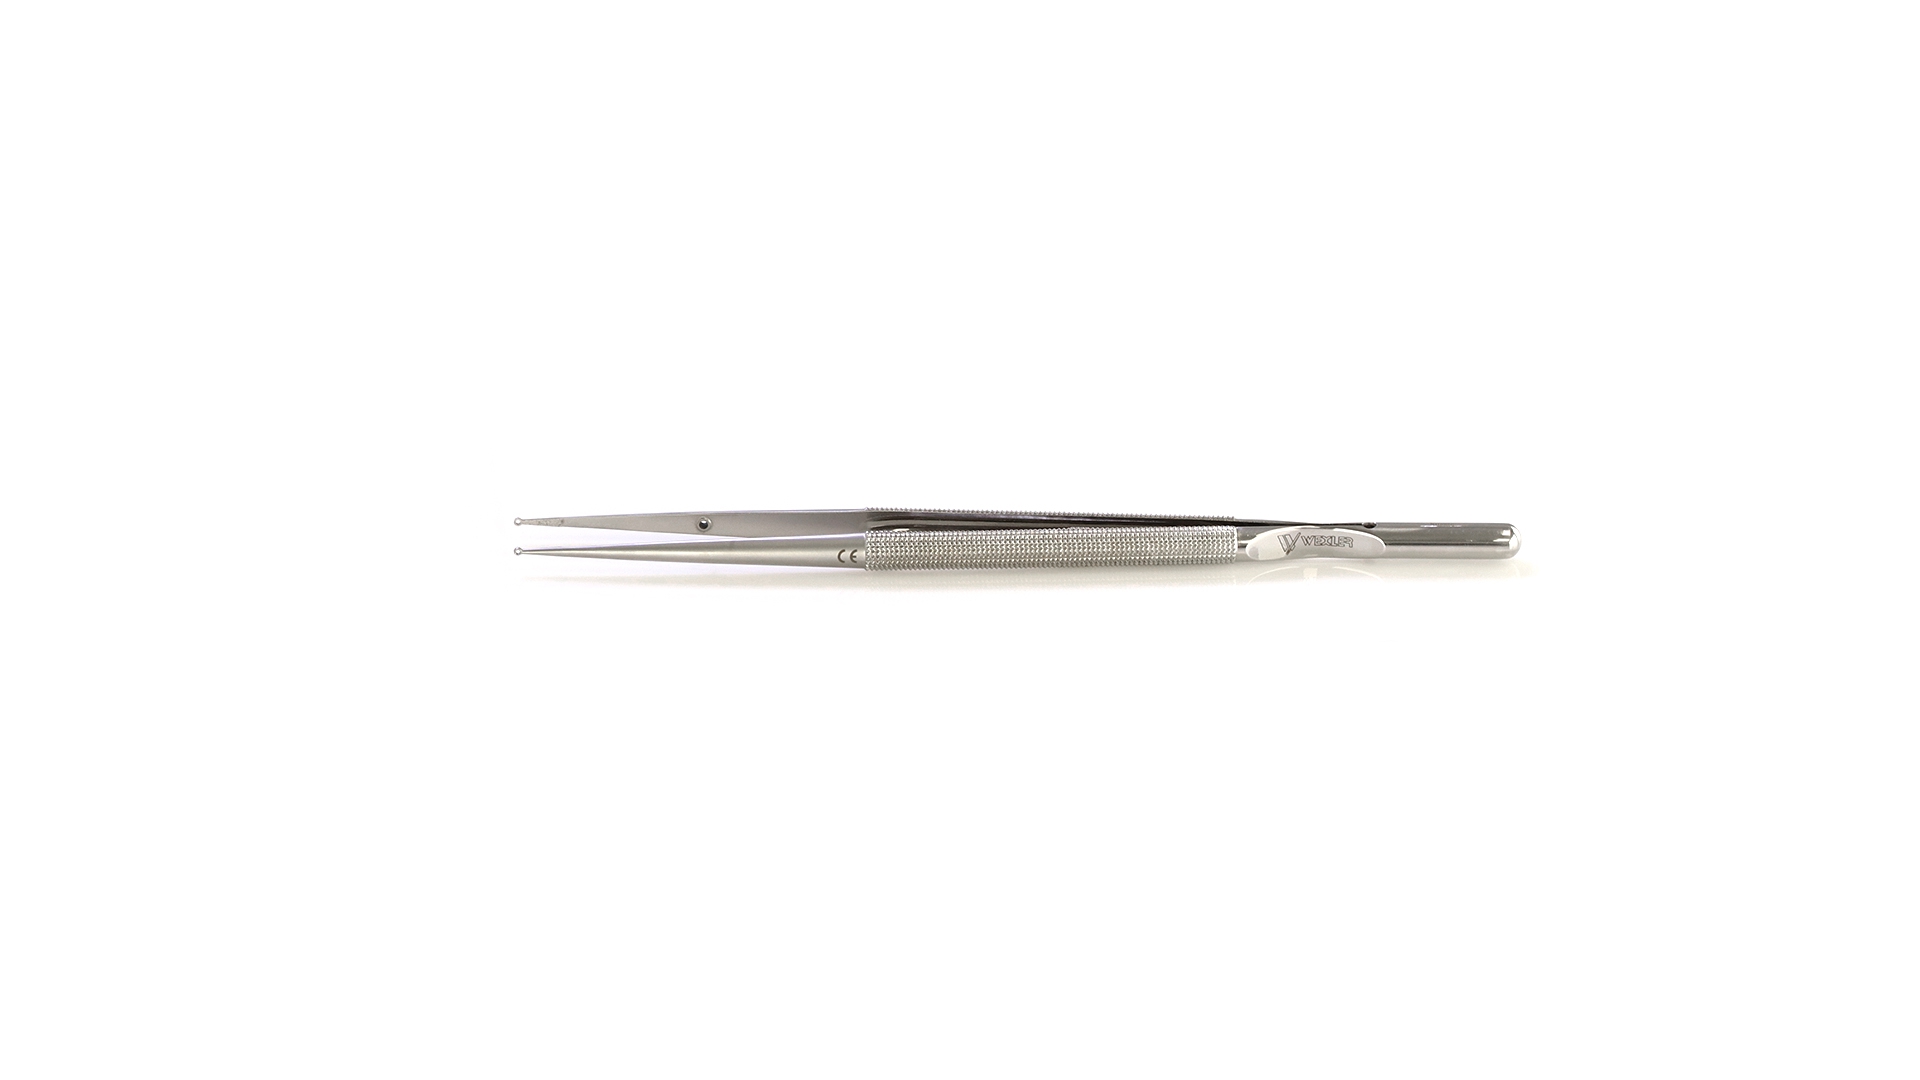 Ring tip Forceps - Straight 1.8mm rings w/TC coated platform